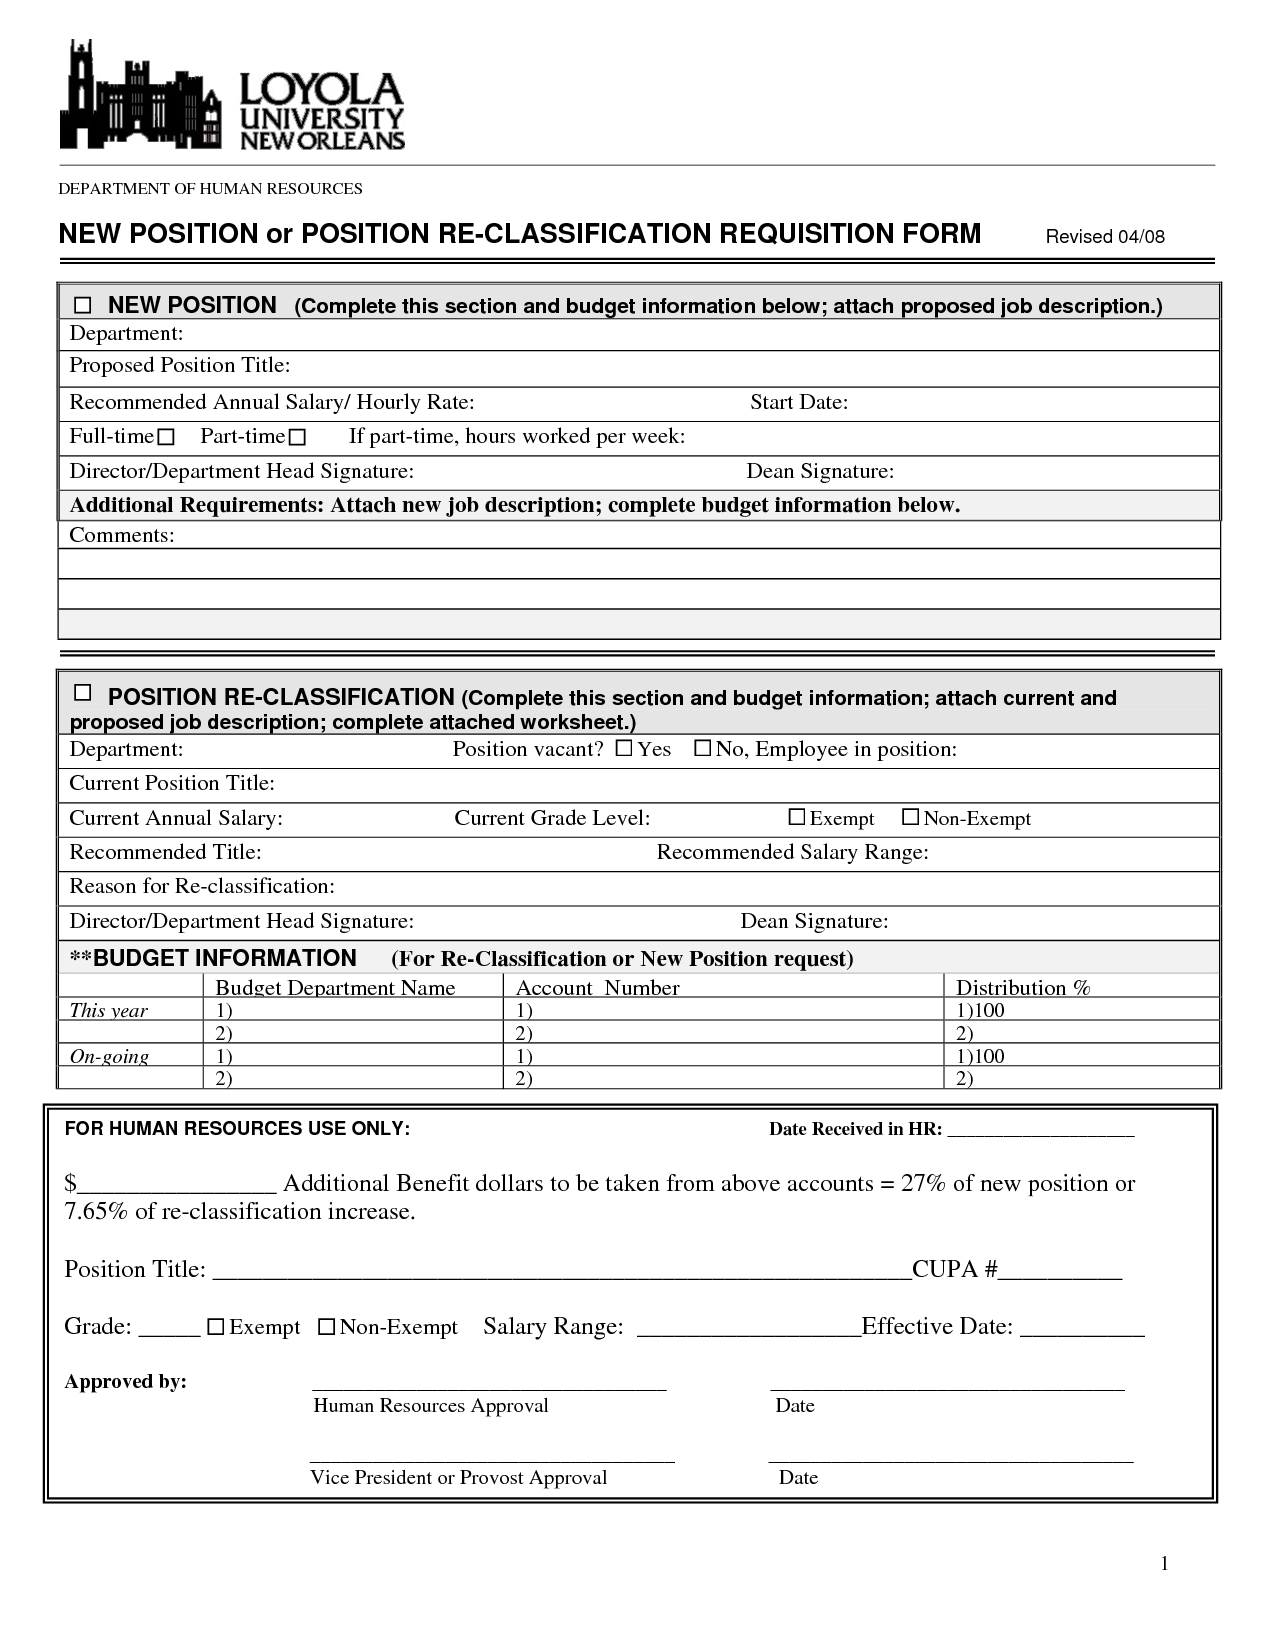 Position Requisition Form Template Image